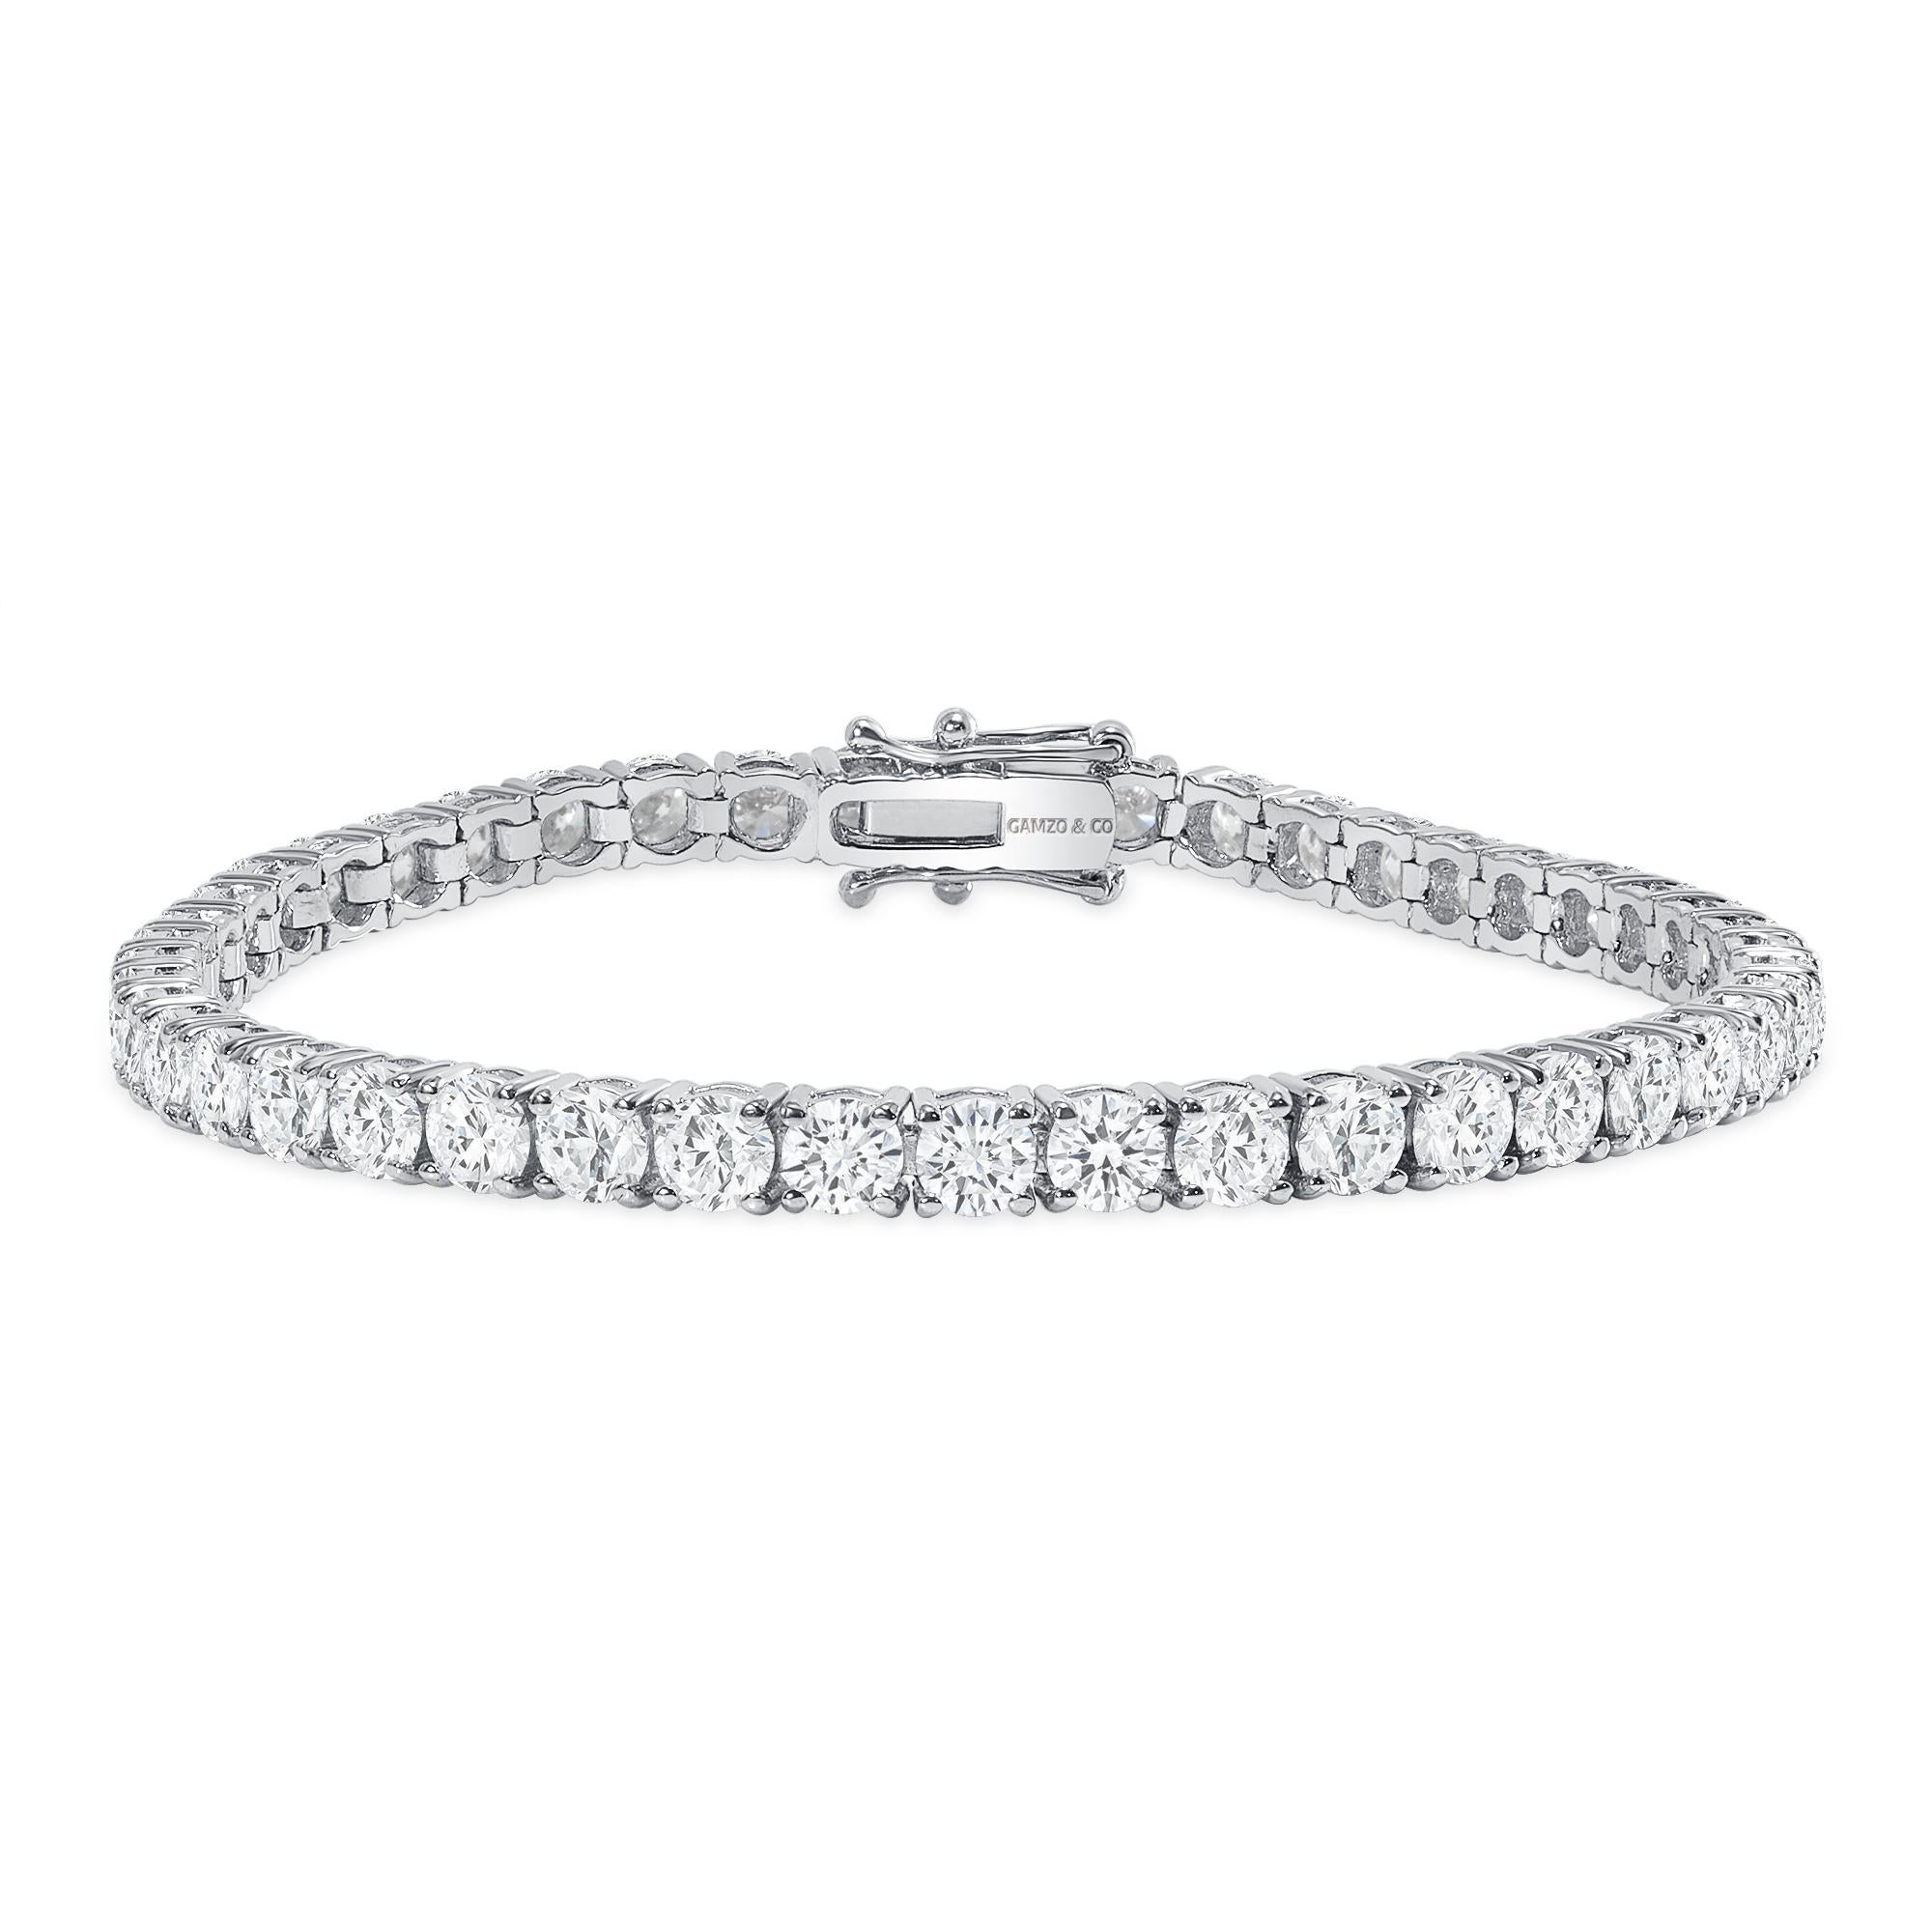 This diamond tennis bracelet features beautifully cut round diamonds set gorgeously in 14k gold.

Metal: 14k Gold
Diamond Cut: Round Natural Diamond 
Total Diamond Carats: 5ct
Diamond Clarity: VS-SI
Diamond Color: F-G
Color: White Gold, Yellow Gold,